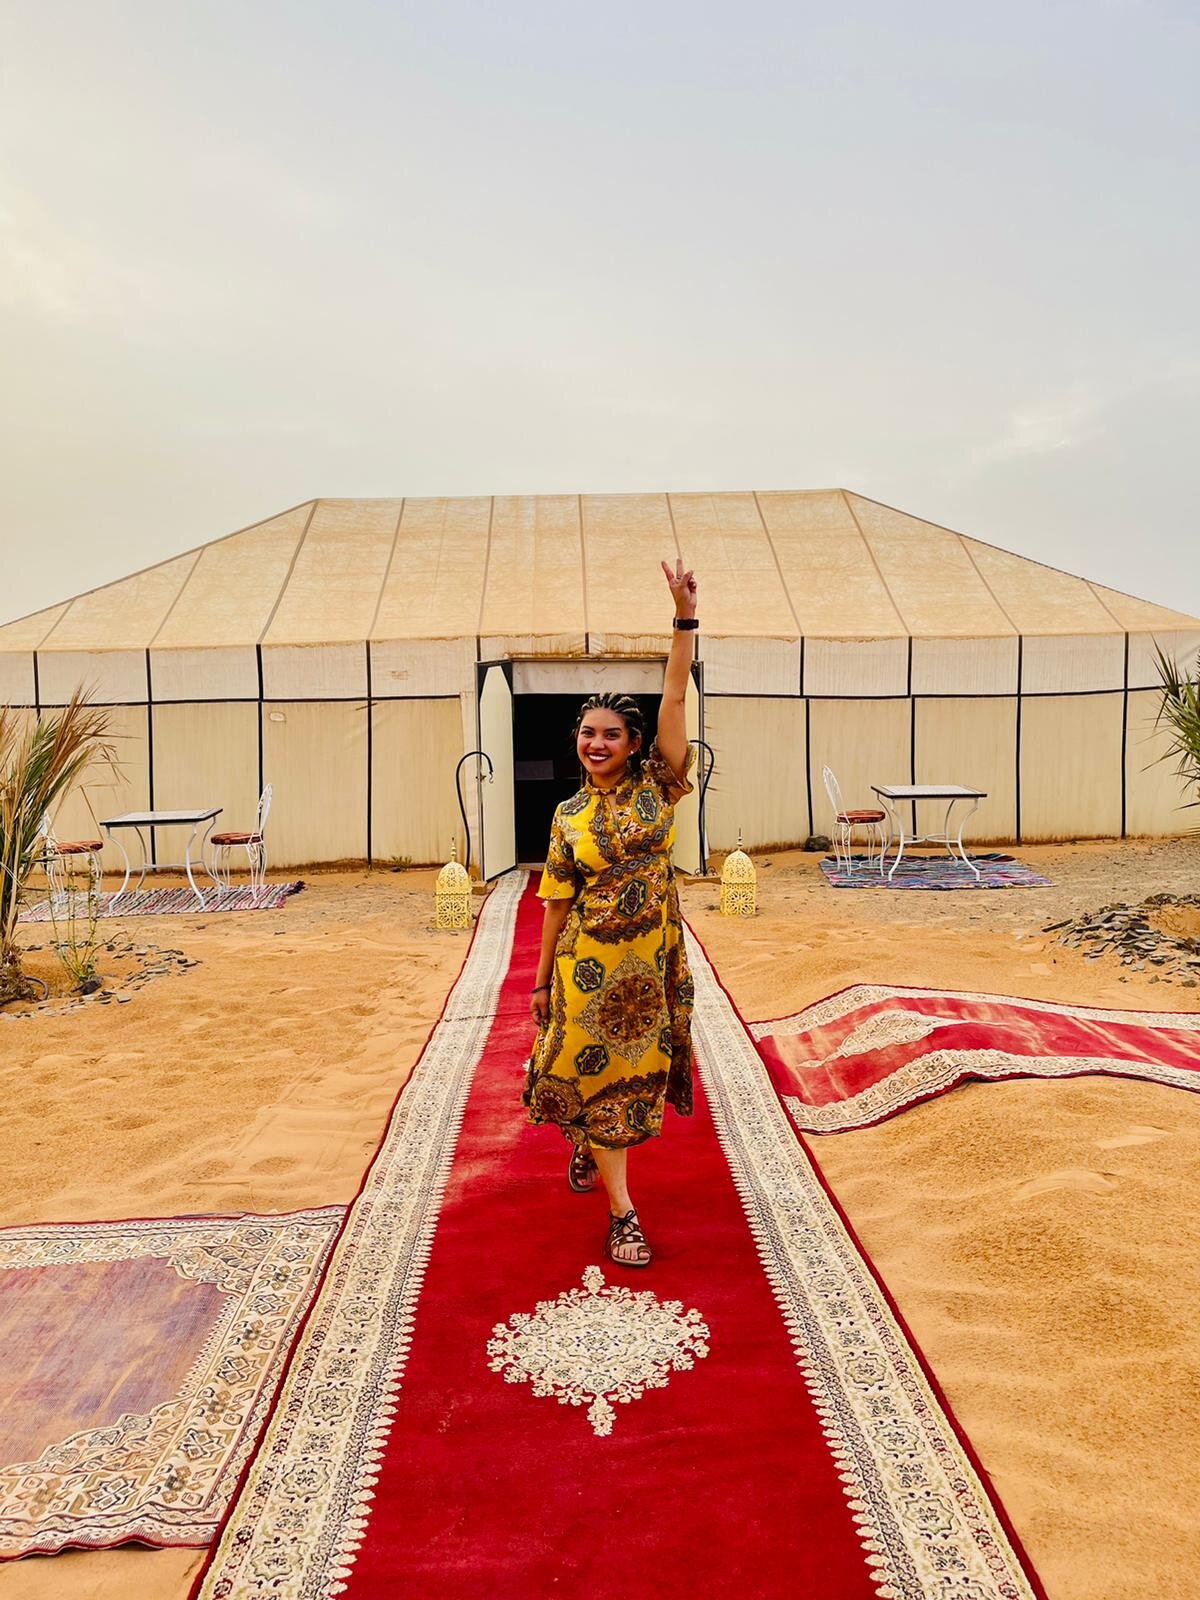 Kach Solo Travels in 2021 Berber-style luxurious Desert Camp in Merzouga, Morocco!29.jpg